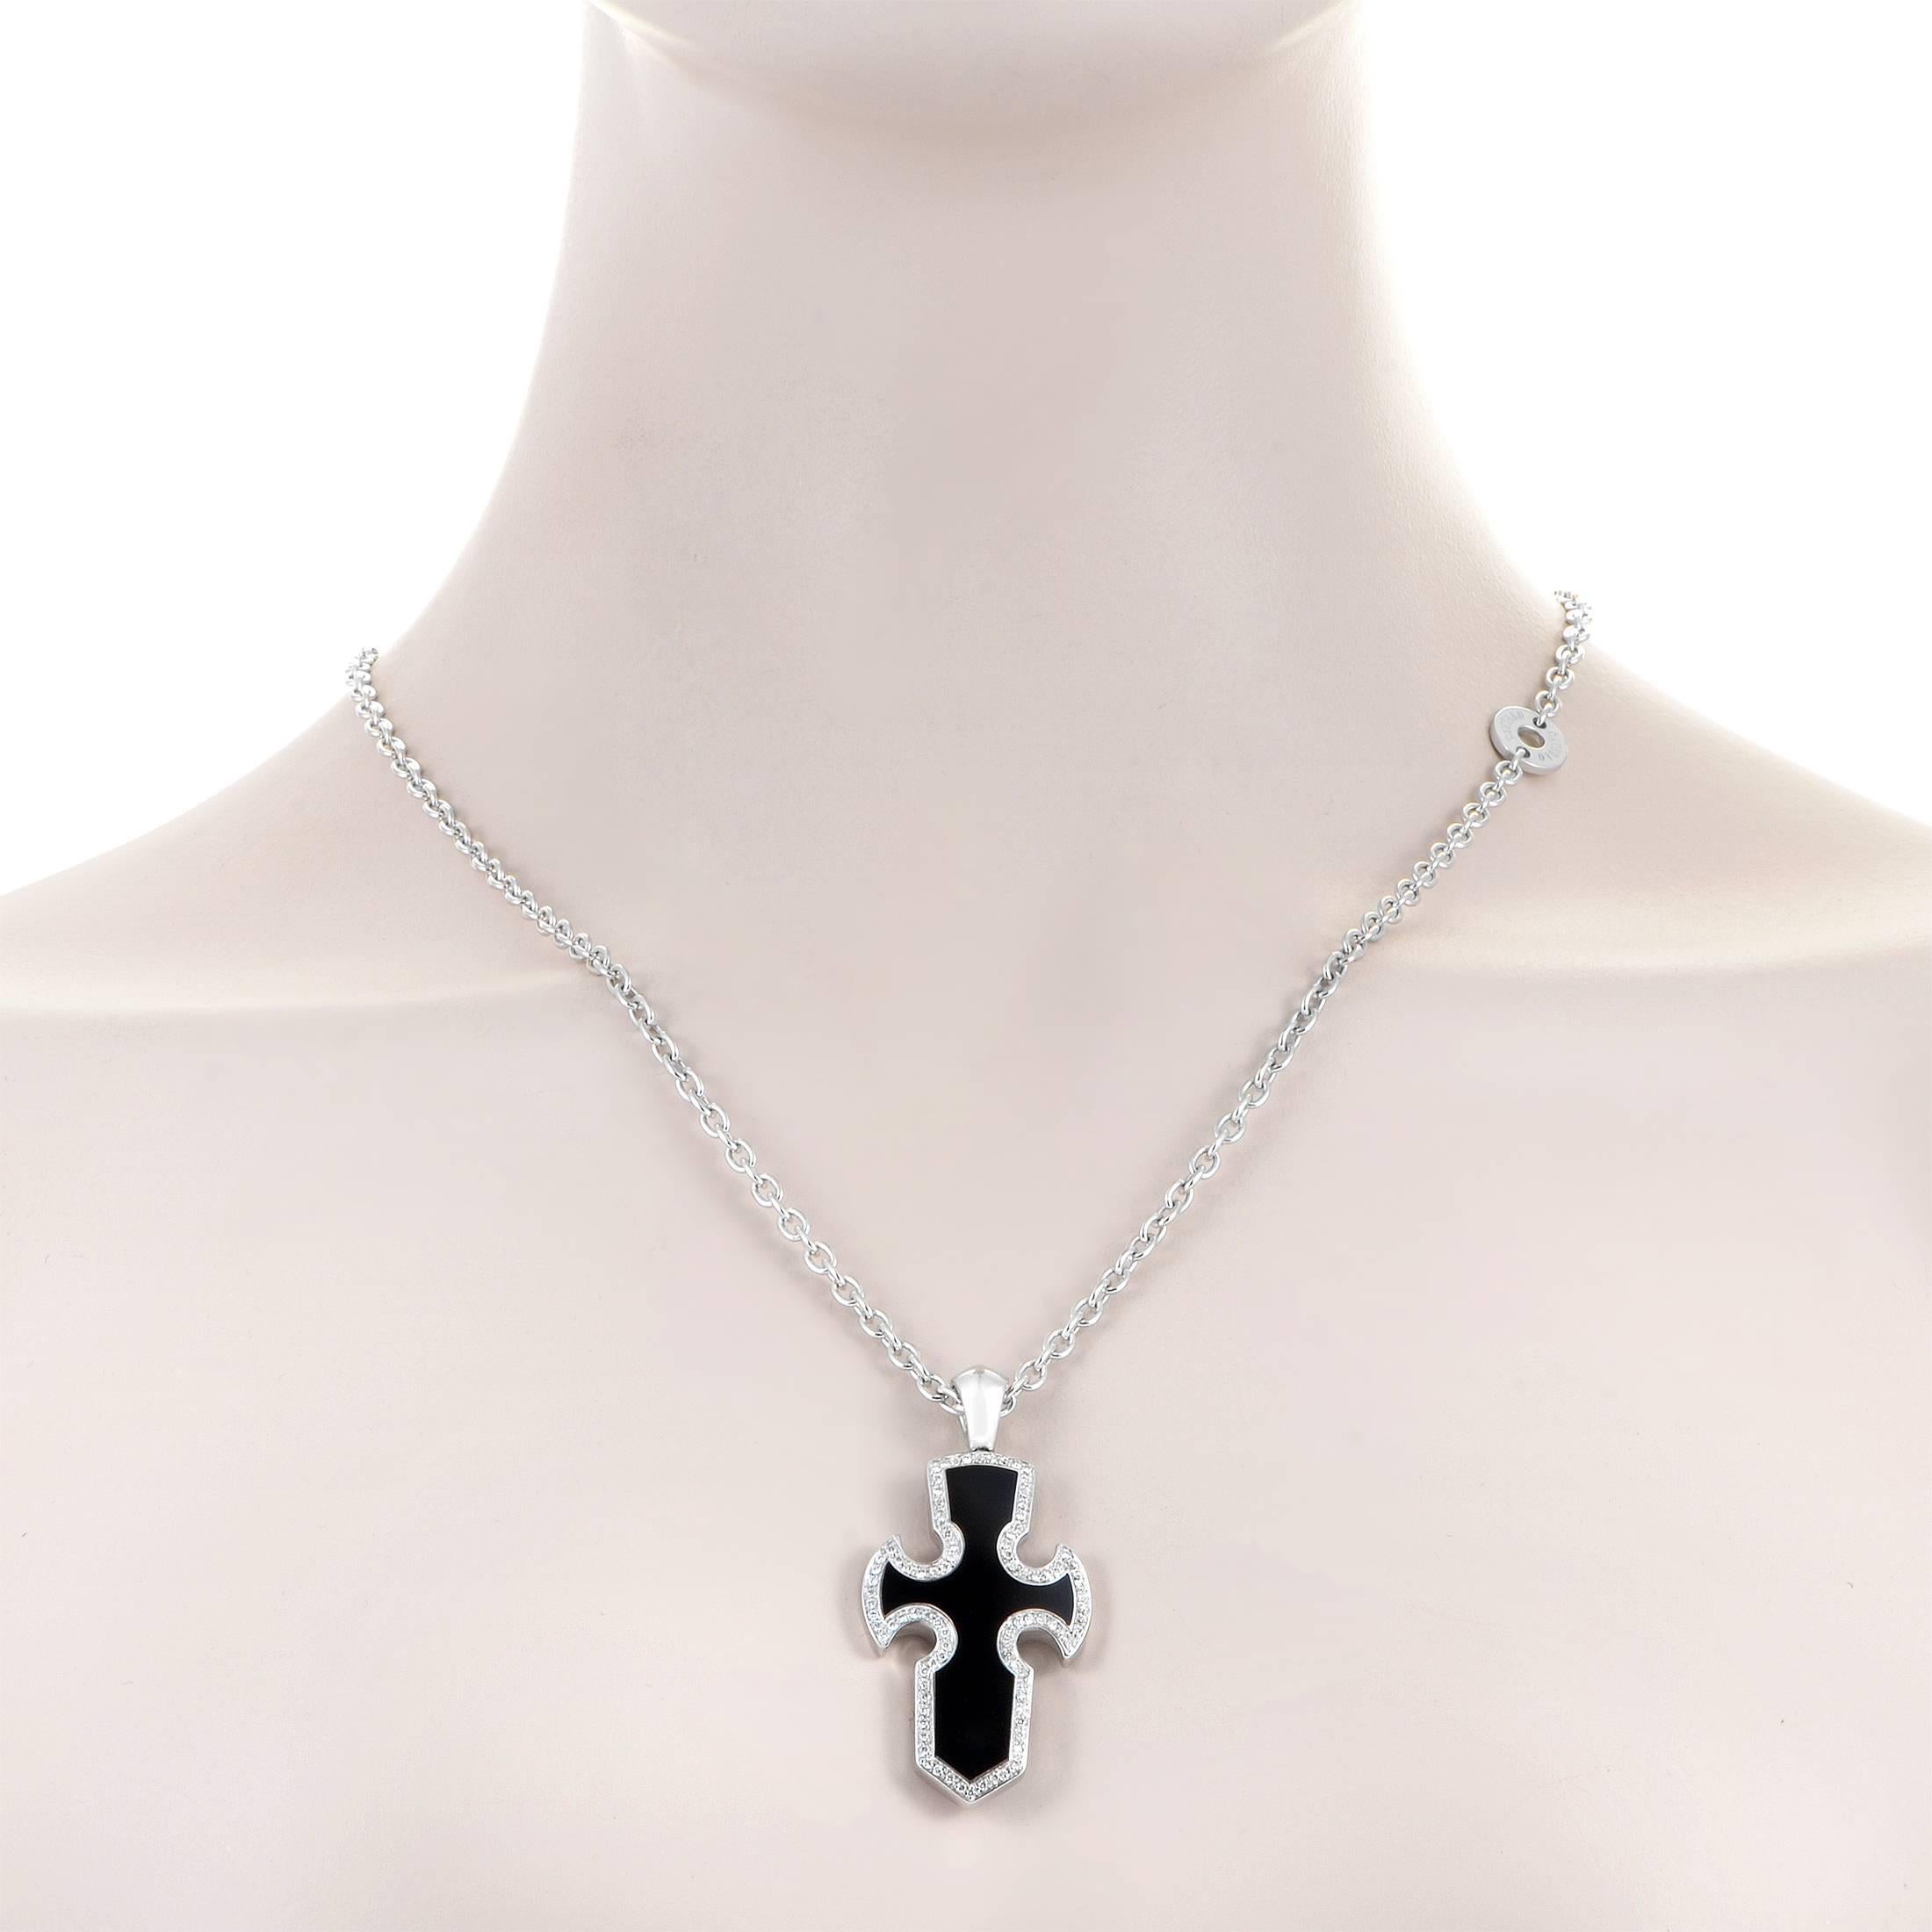 This pendant necklace from Gavello's Gotham collection is dark and edgy. The necklace is made of 18K white gold and boasts a cross-shaped pendant set with onyx and lined with 1ct of diamonds.
Pendant Dimensions: 2.00 x 1.00